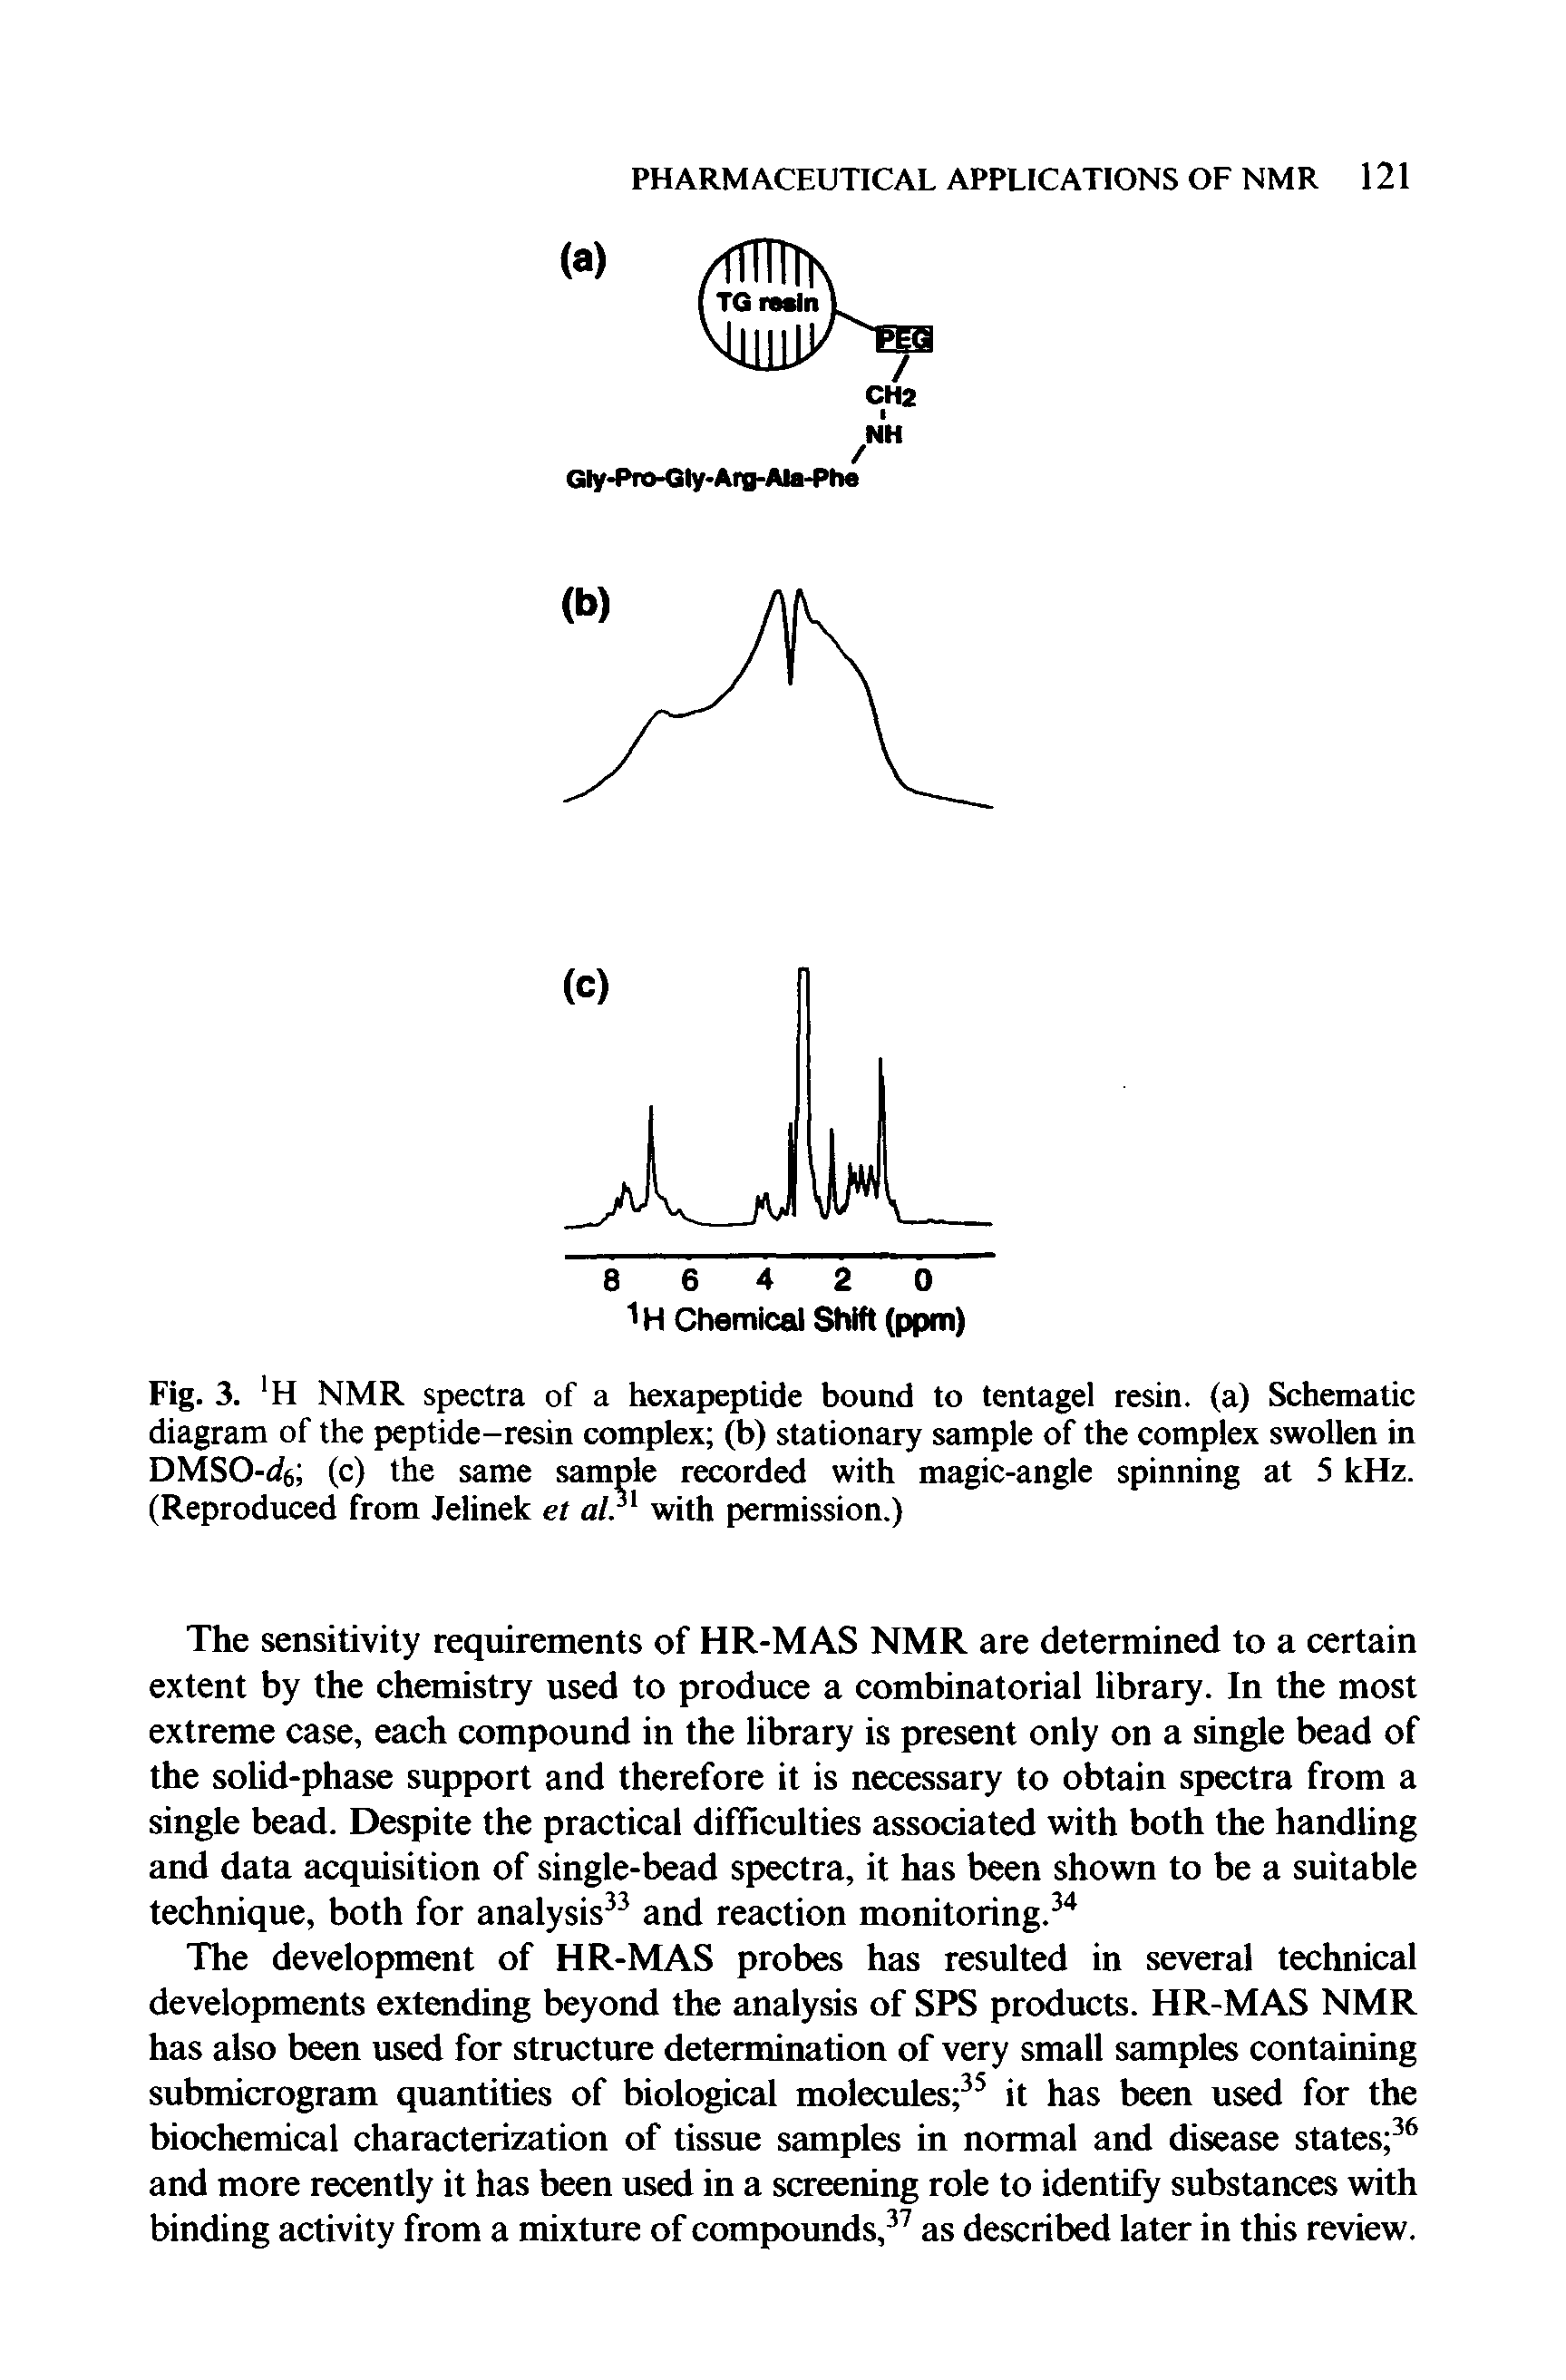 Fig. 3. H NMR spectra of a hexapeptide bound to tentagel resin, (a) Schematic diagram of the peptide-resin complex (b) stationary sample of the complex swollen in DMSO-4 (c) the same sample recorded with magic-angle spinning at 5 kHz. (Reproduced from Jelinek et al. with permission.)...